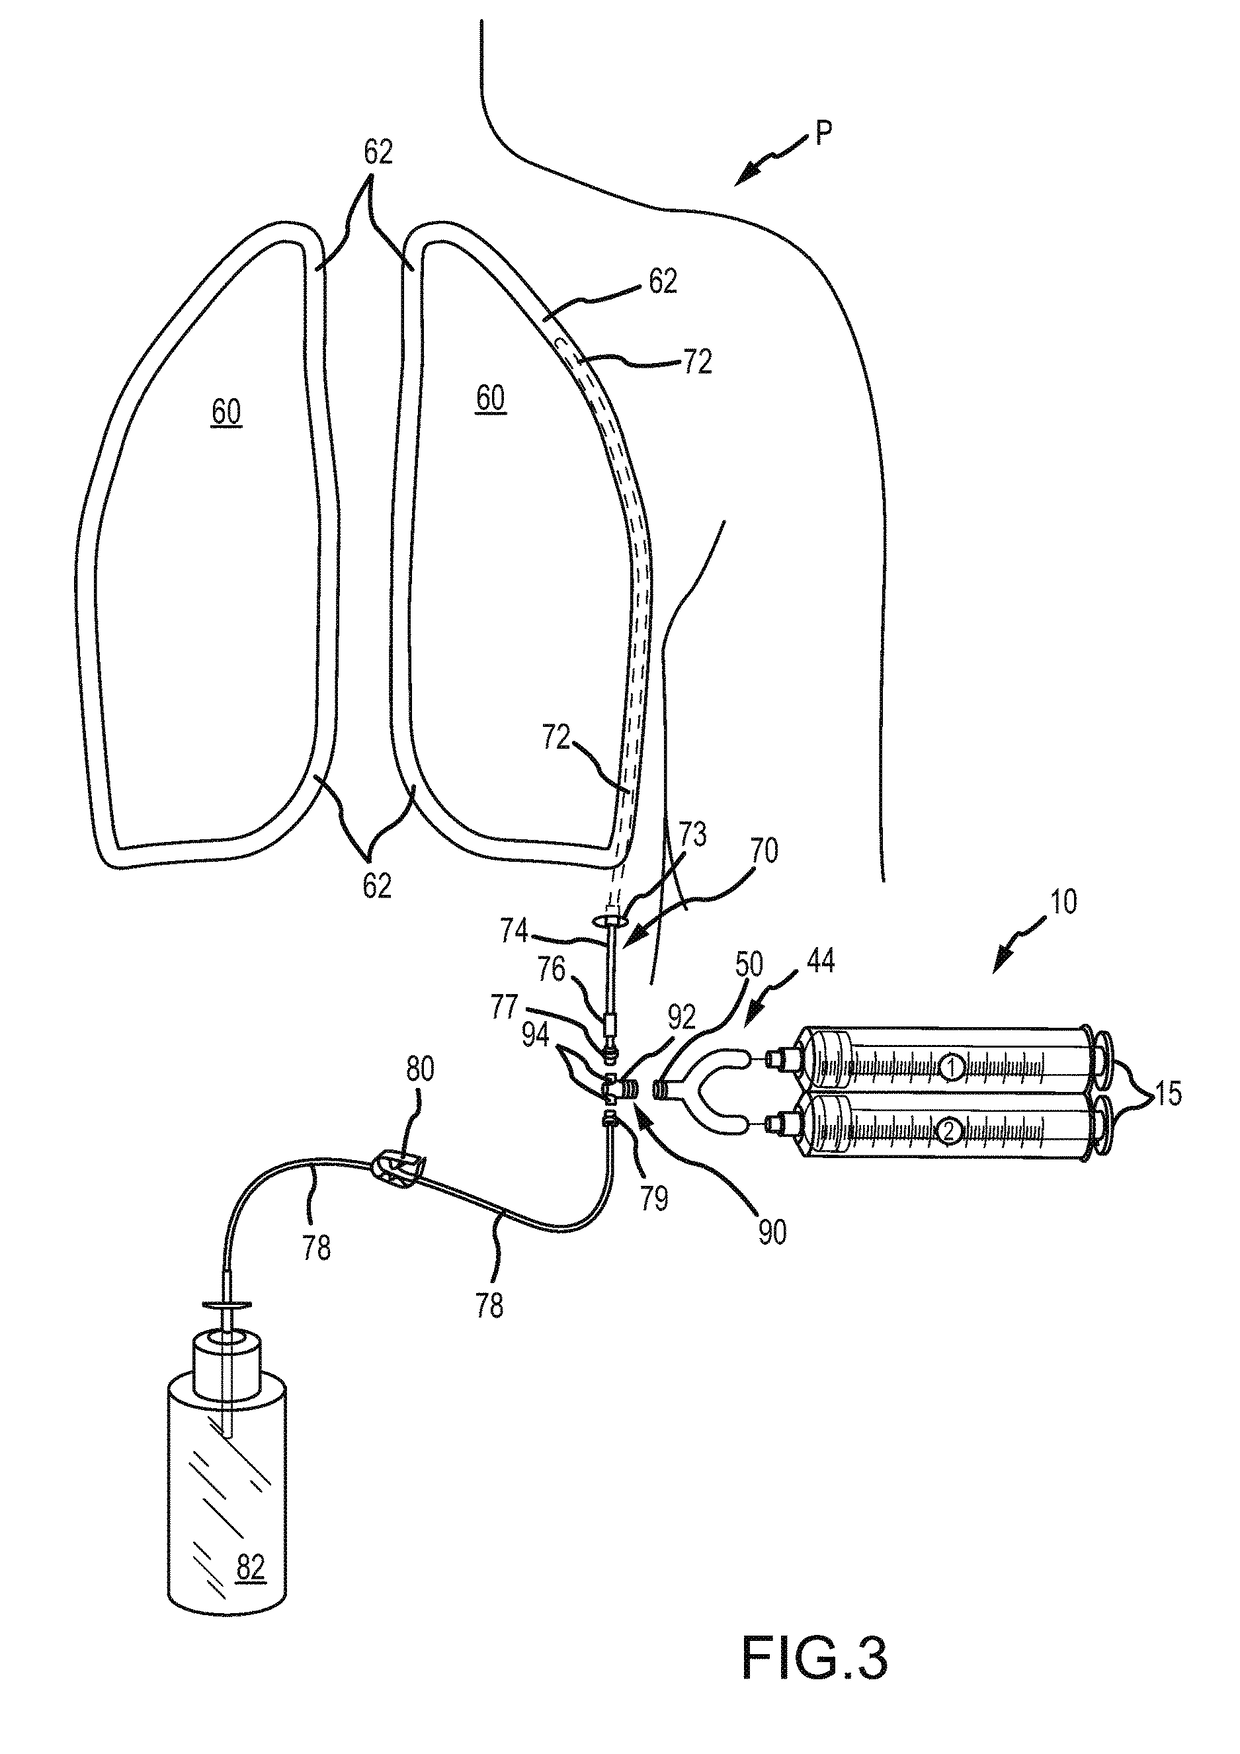 Device and method to facilitate pleurodesis for management of fluid drainage